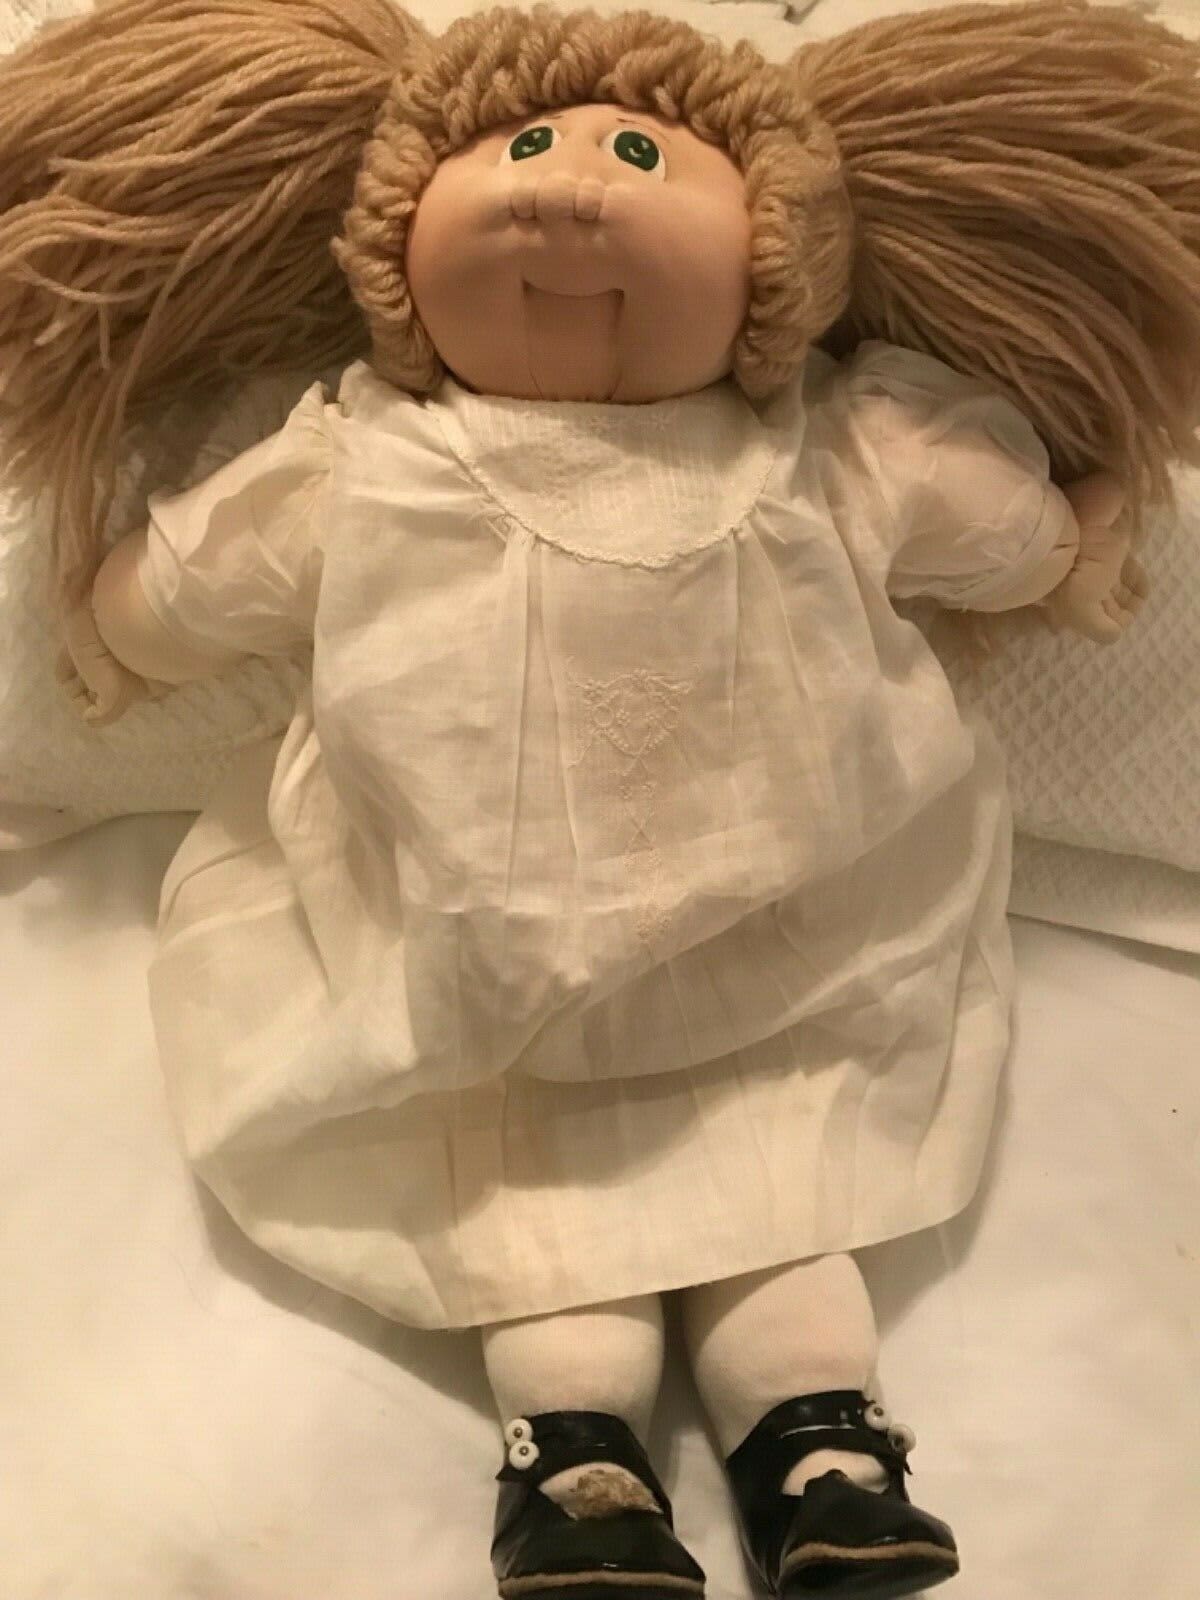 cabbage patch doll with pigtails